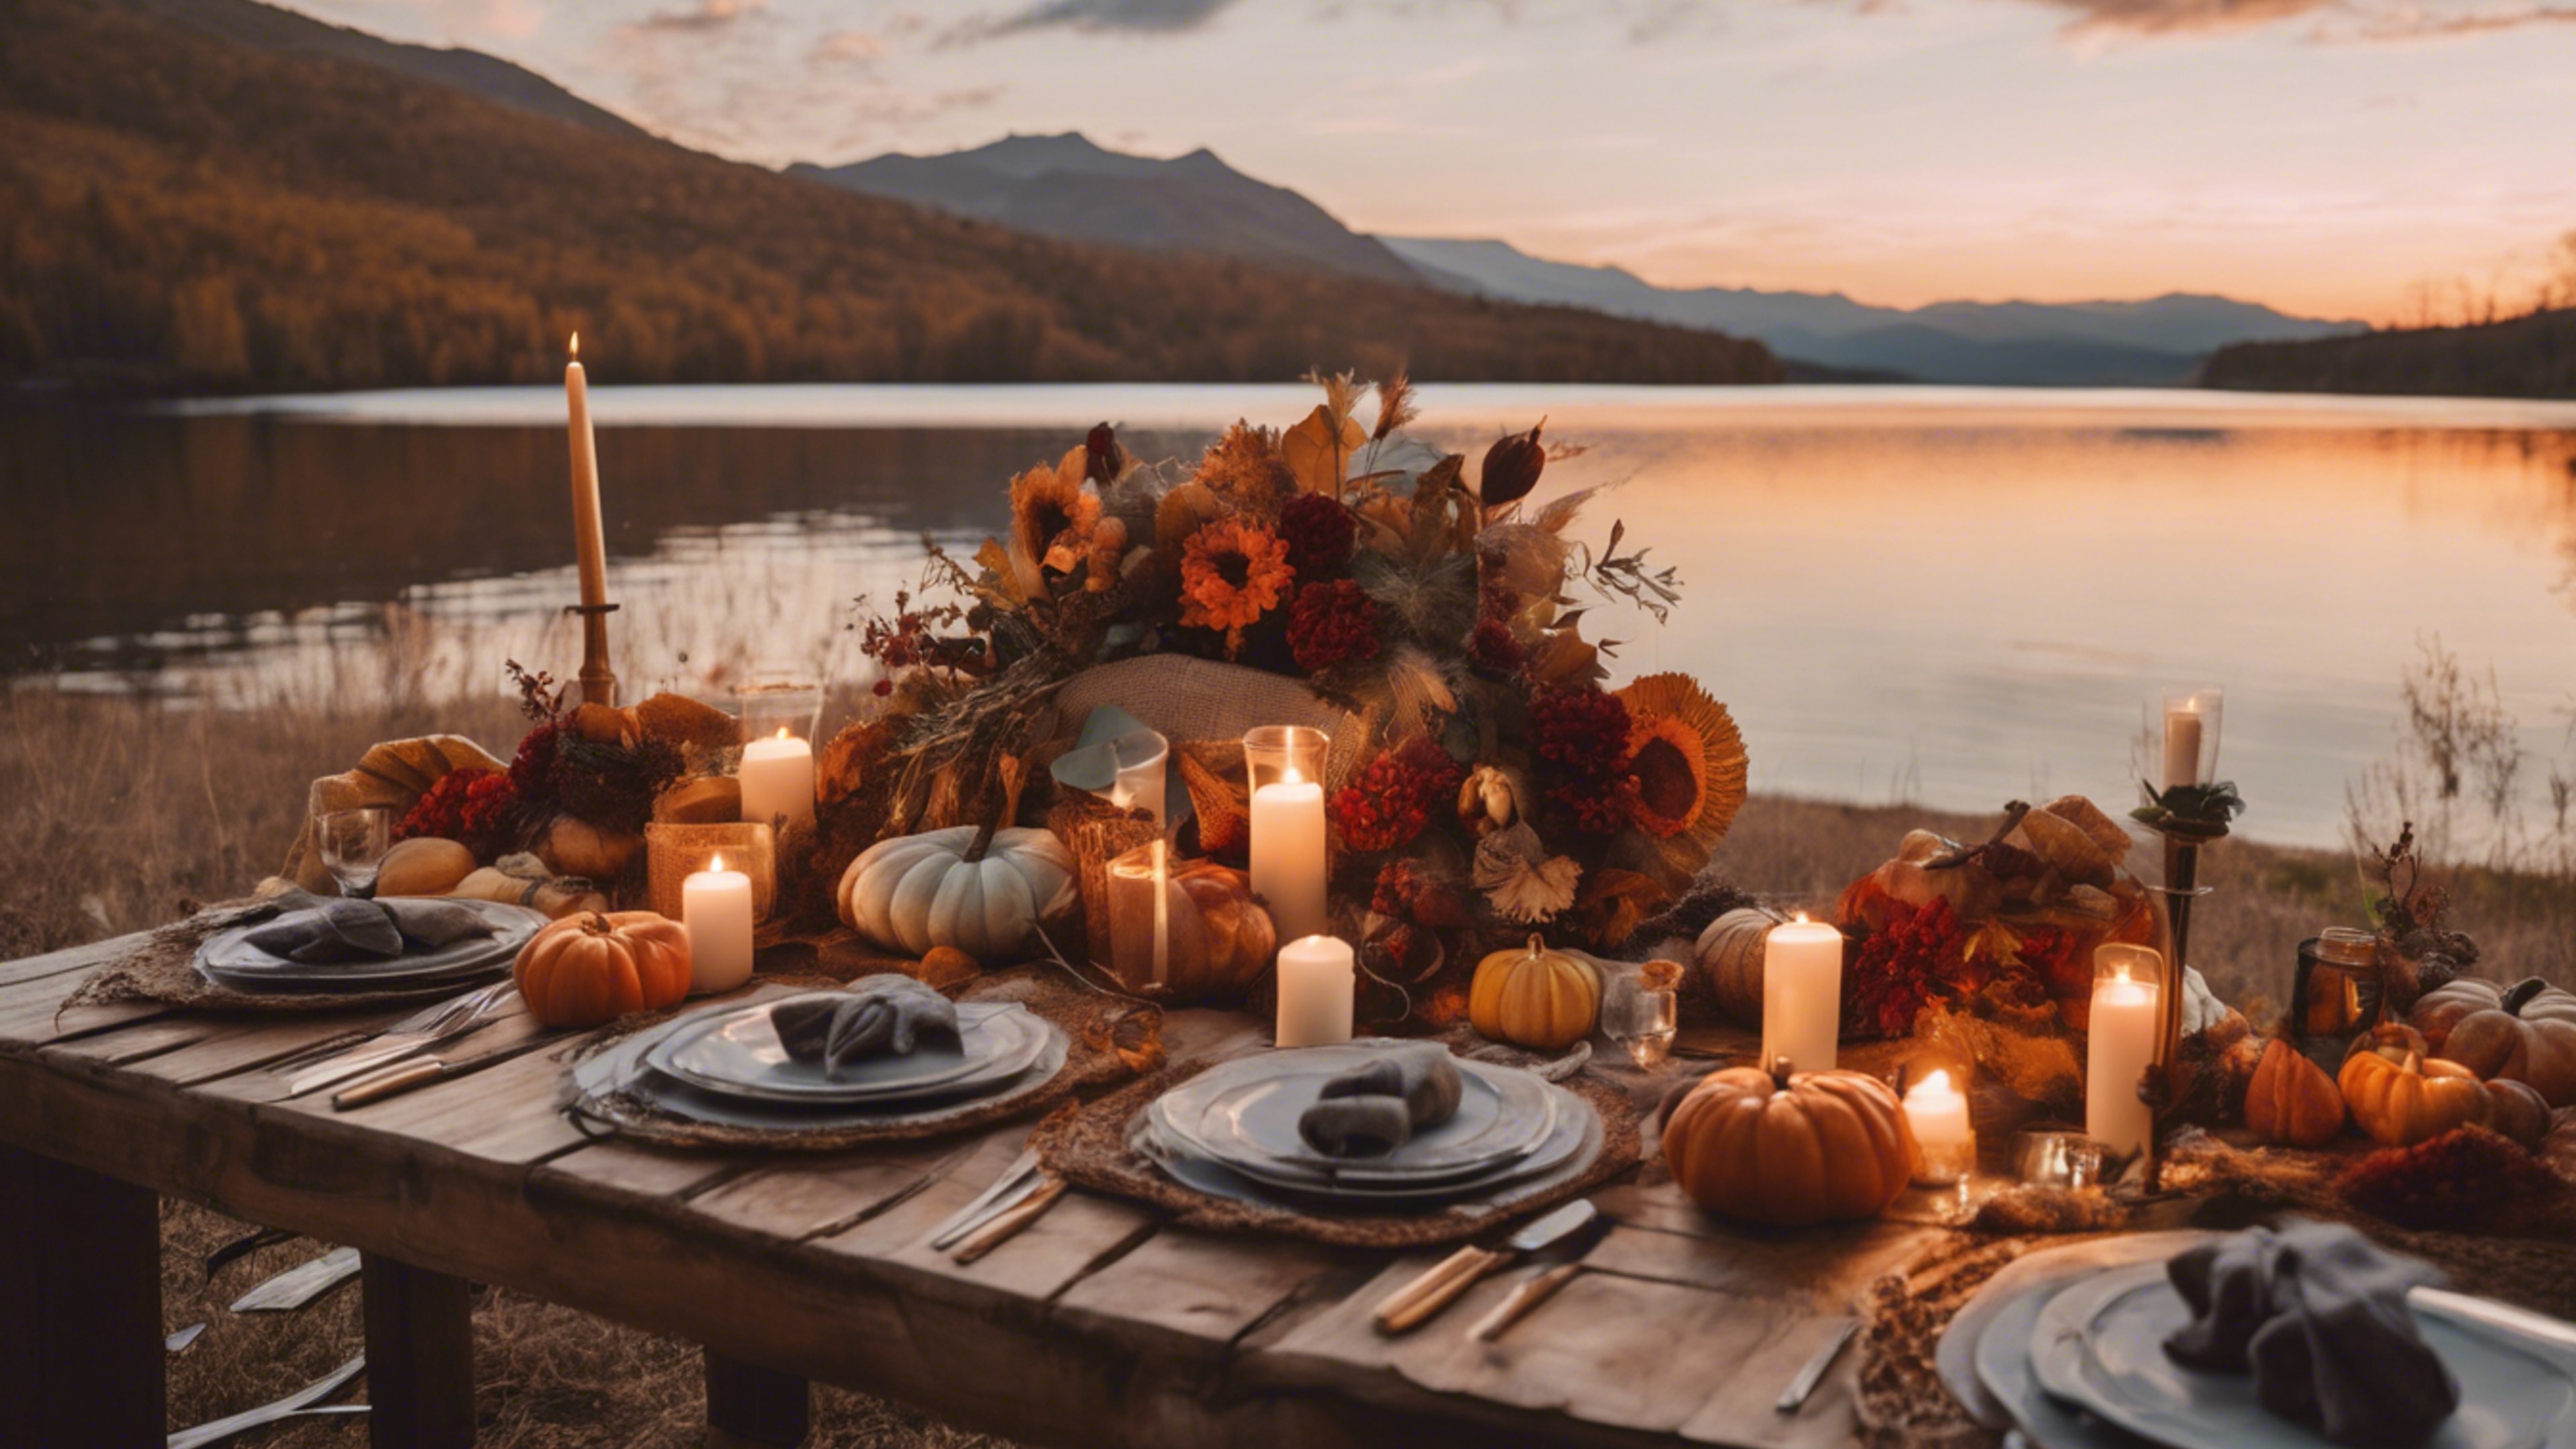 An outdoor Thanksgiving setup with boho decorations next to a breathtaking mountain lake during sunset. Tapet[488ff8a1b73146e3b682]